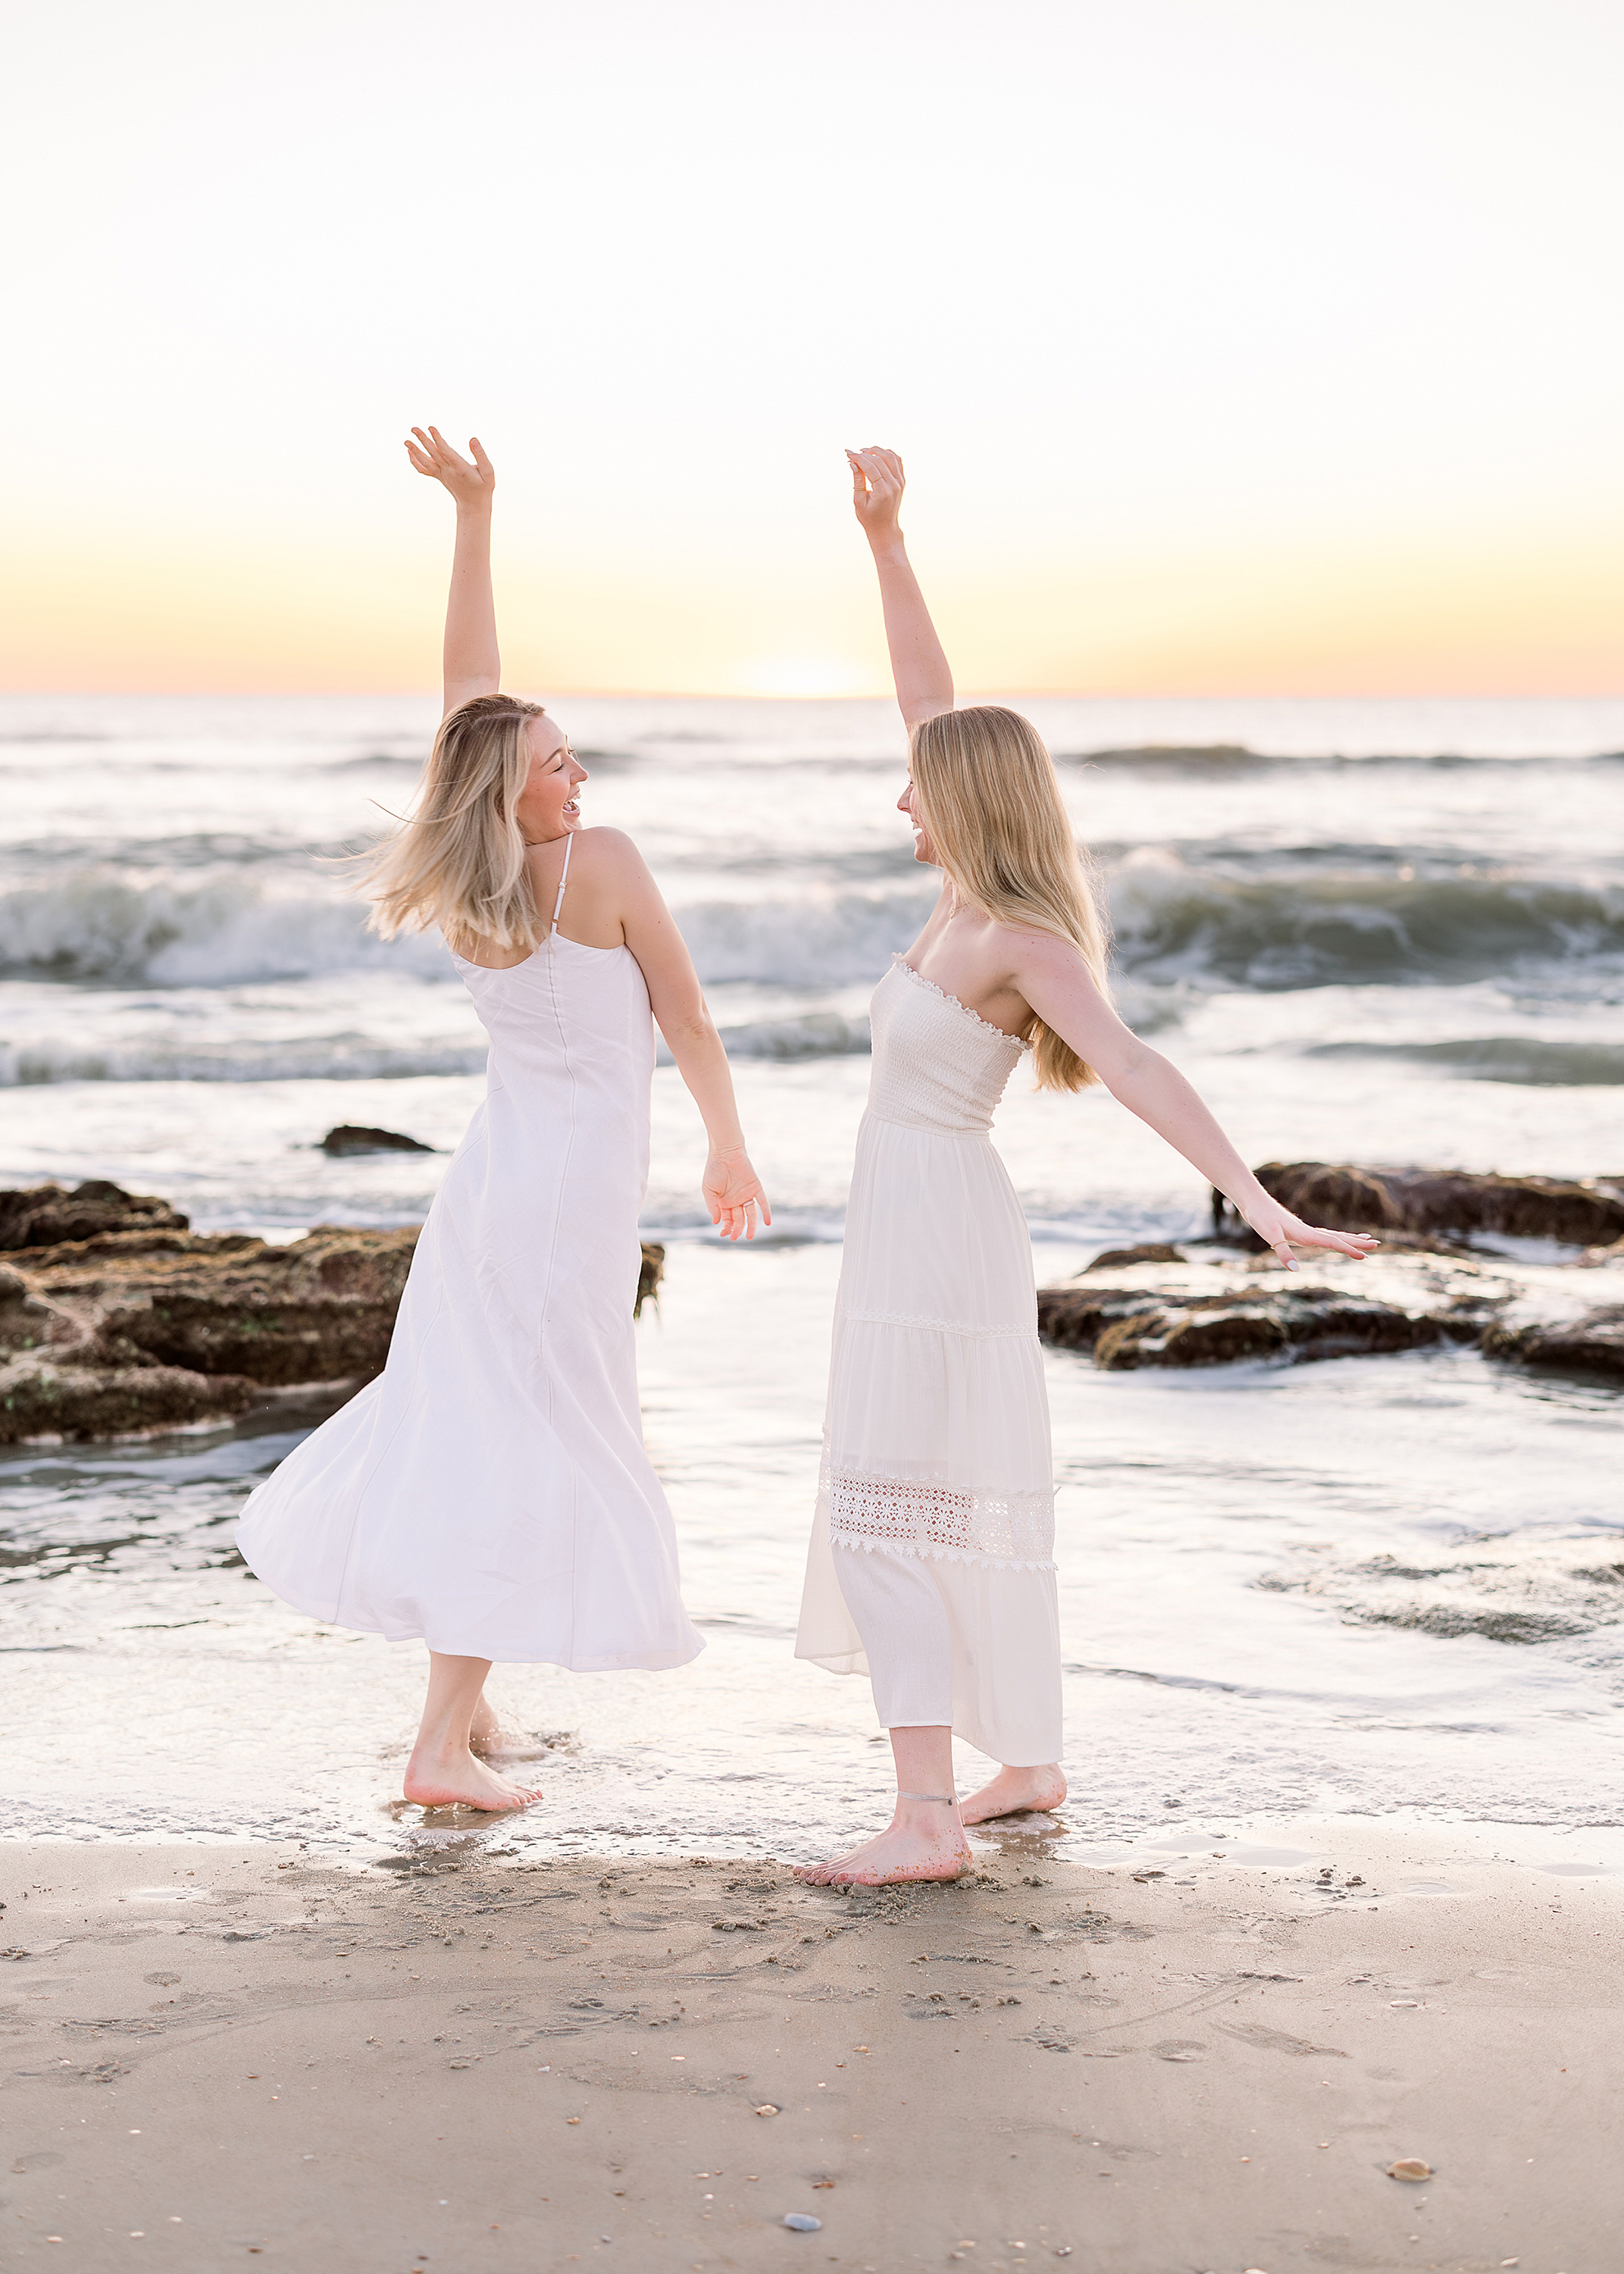 Two women in white dresses dancing at sunrise on the beach.